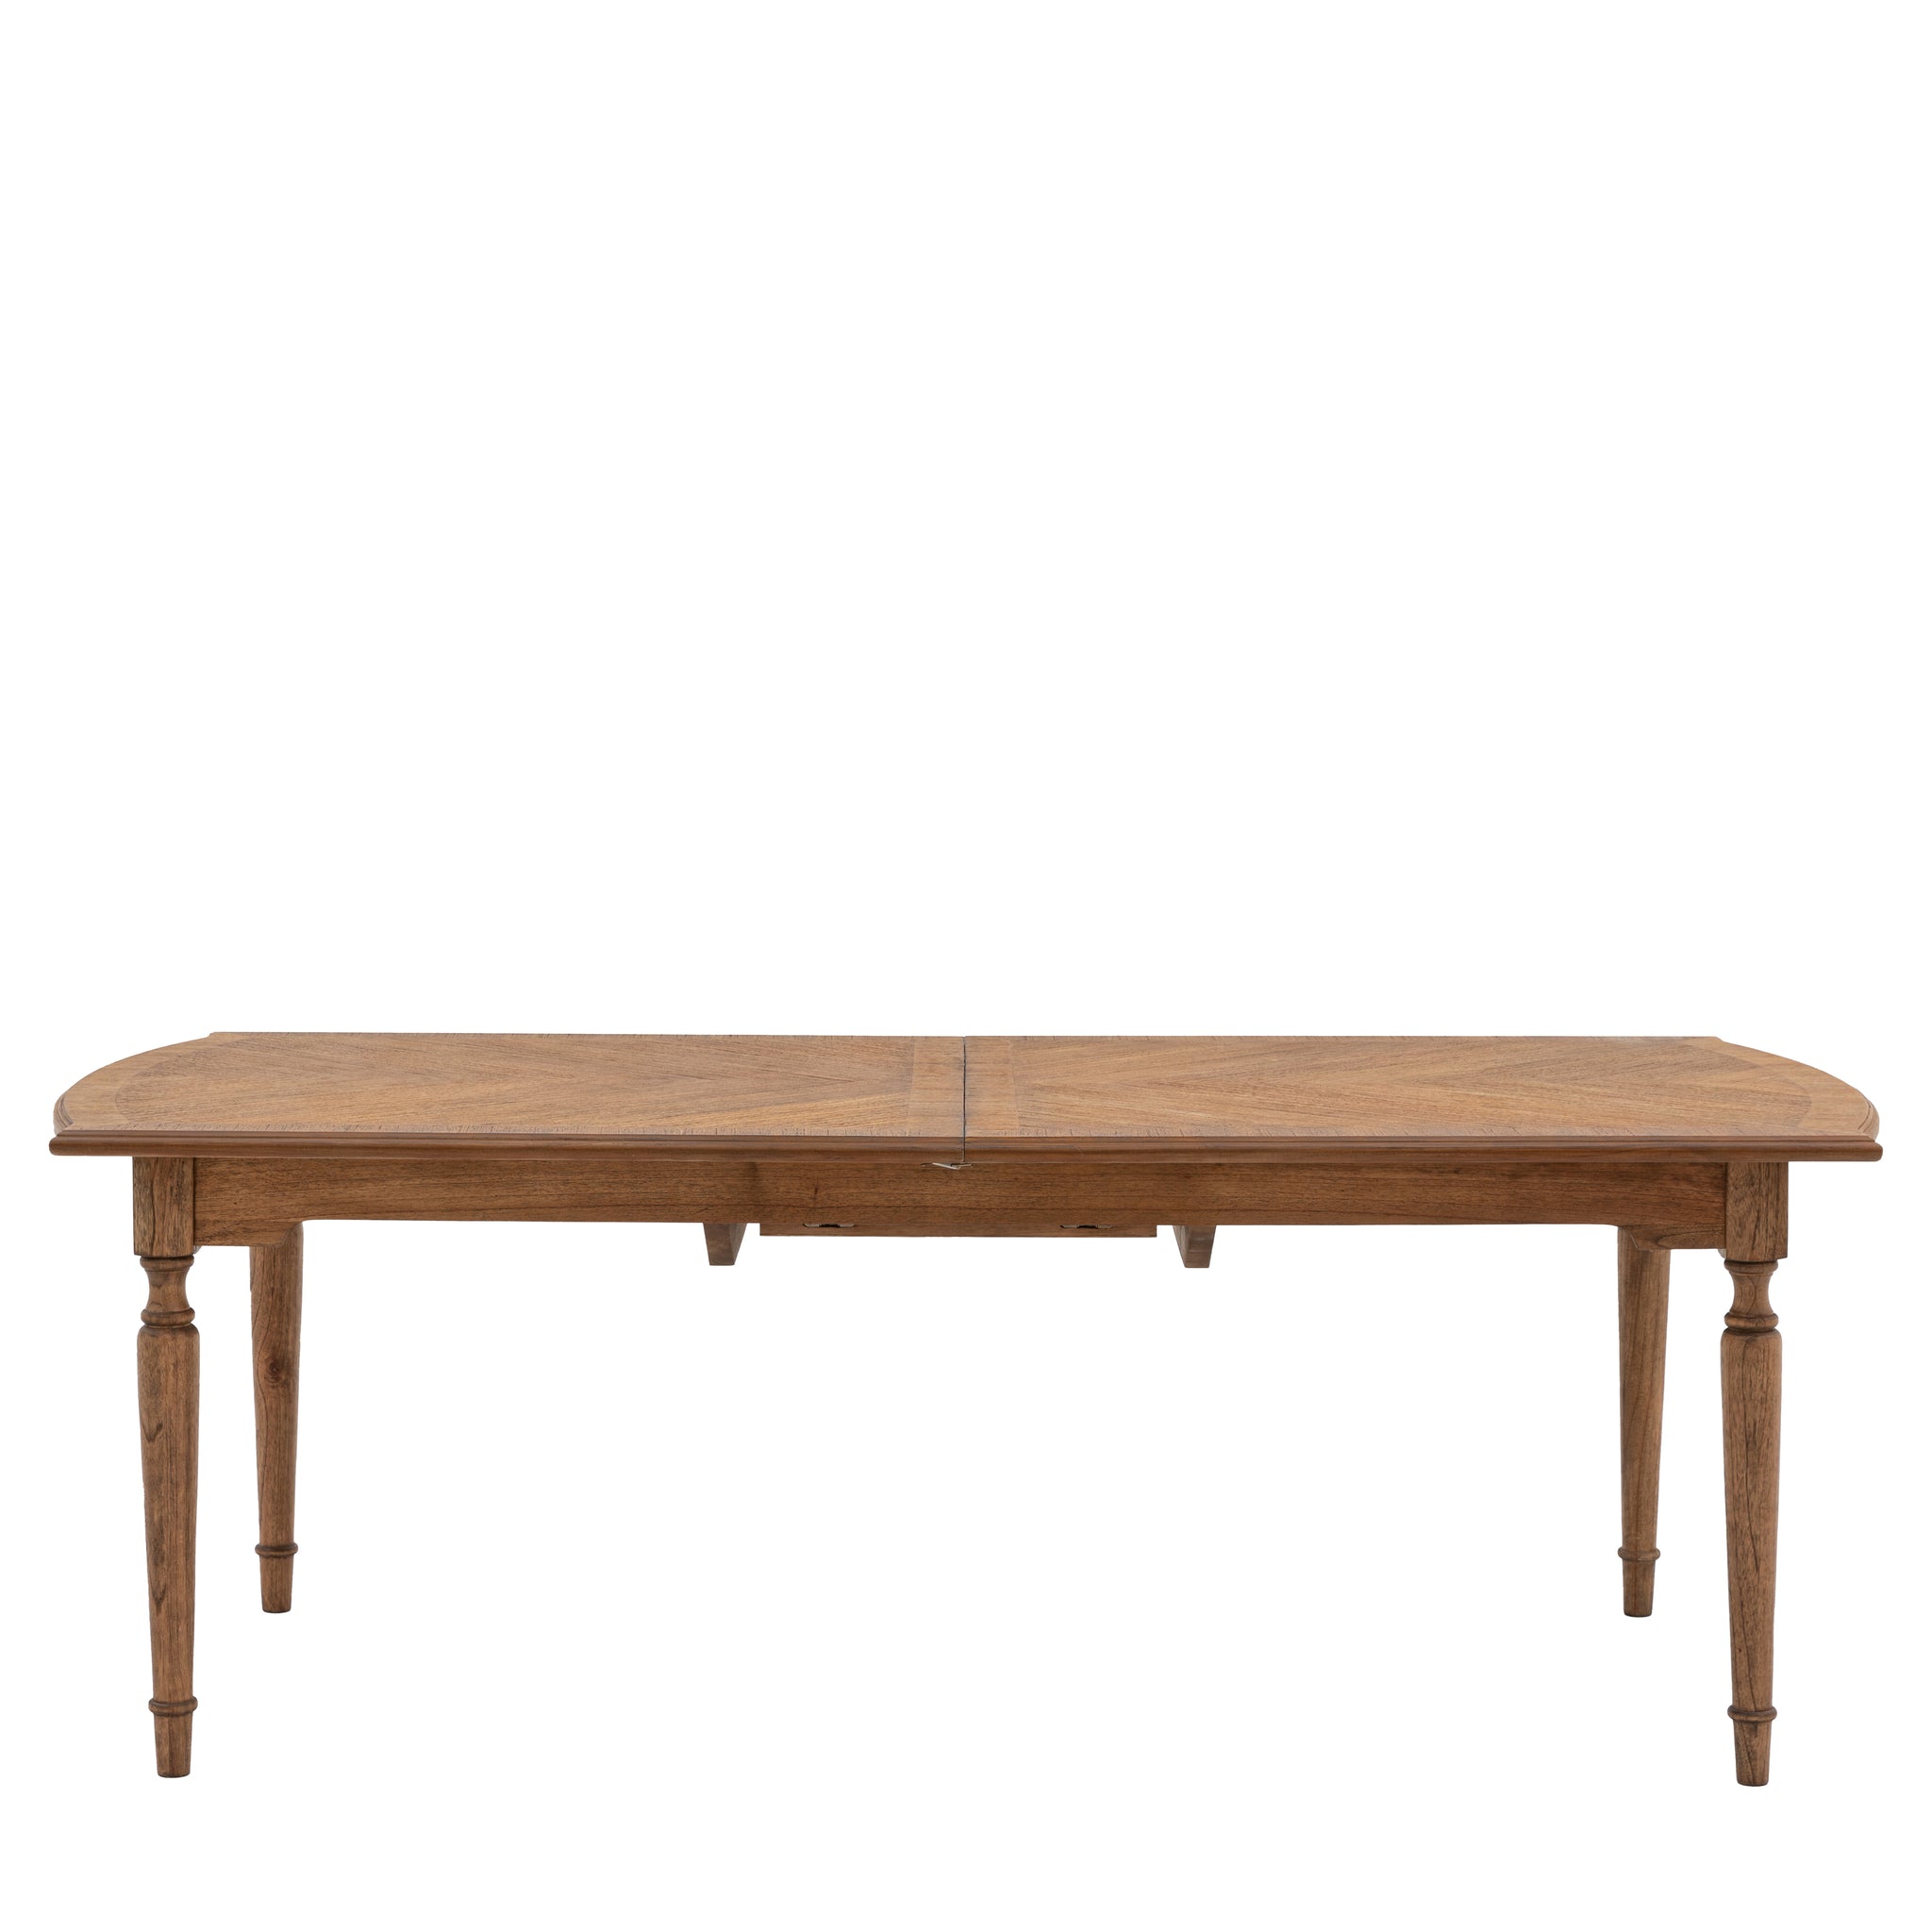 Grove Extending Dining Table Mindy Wood